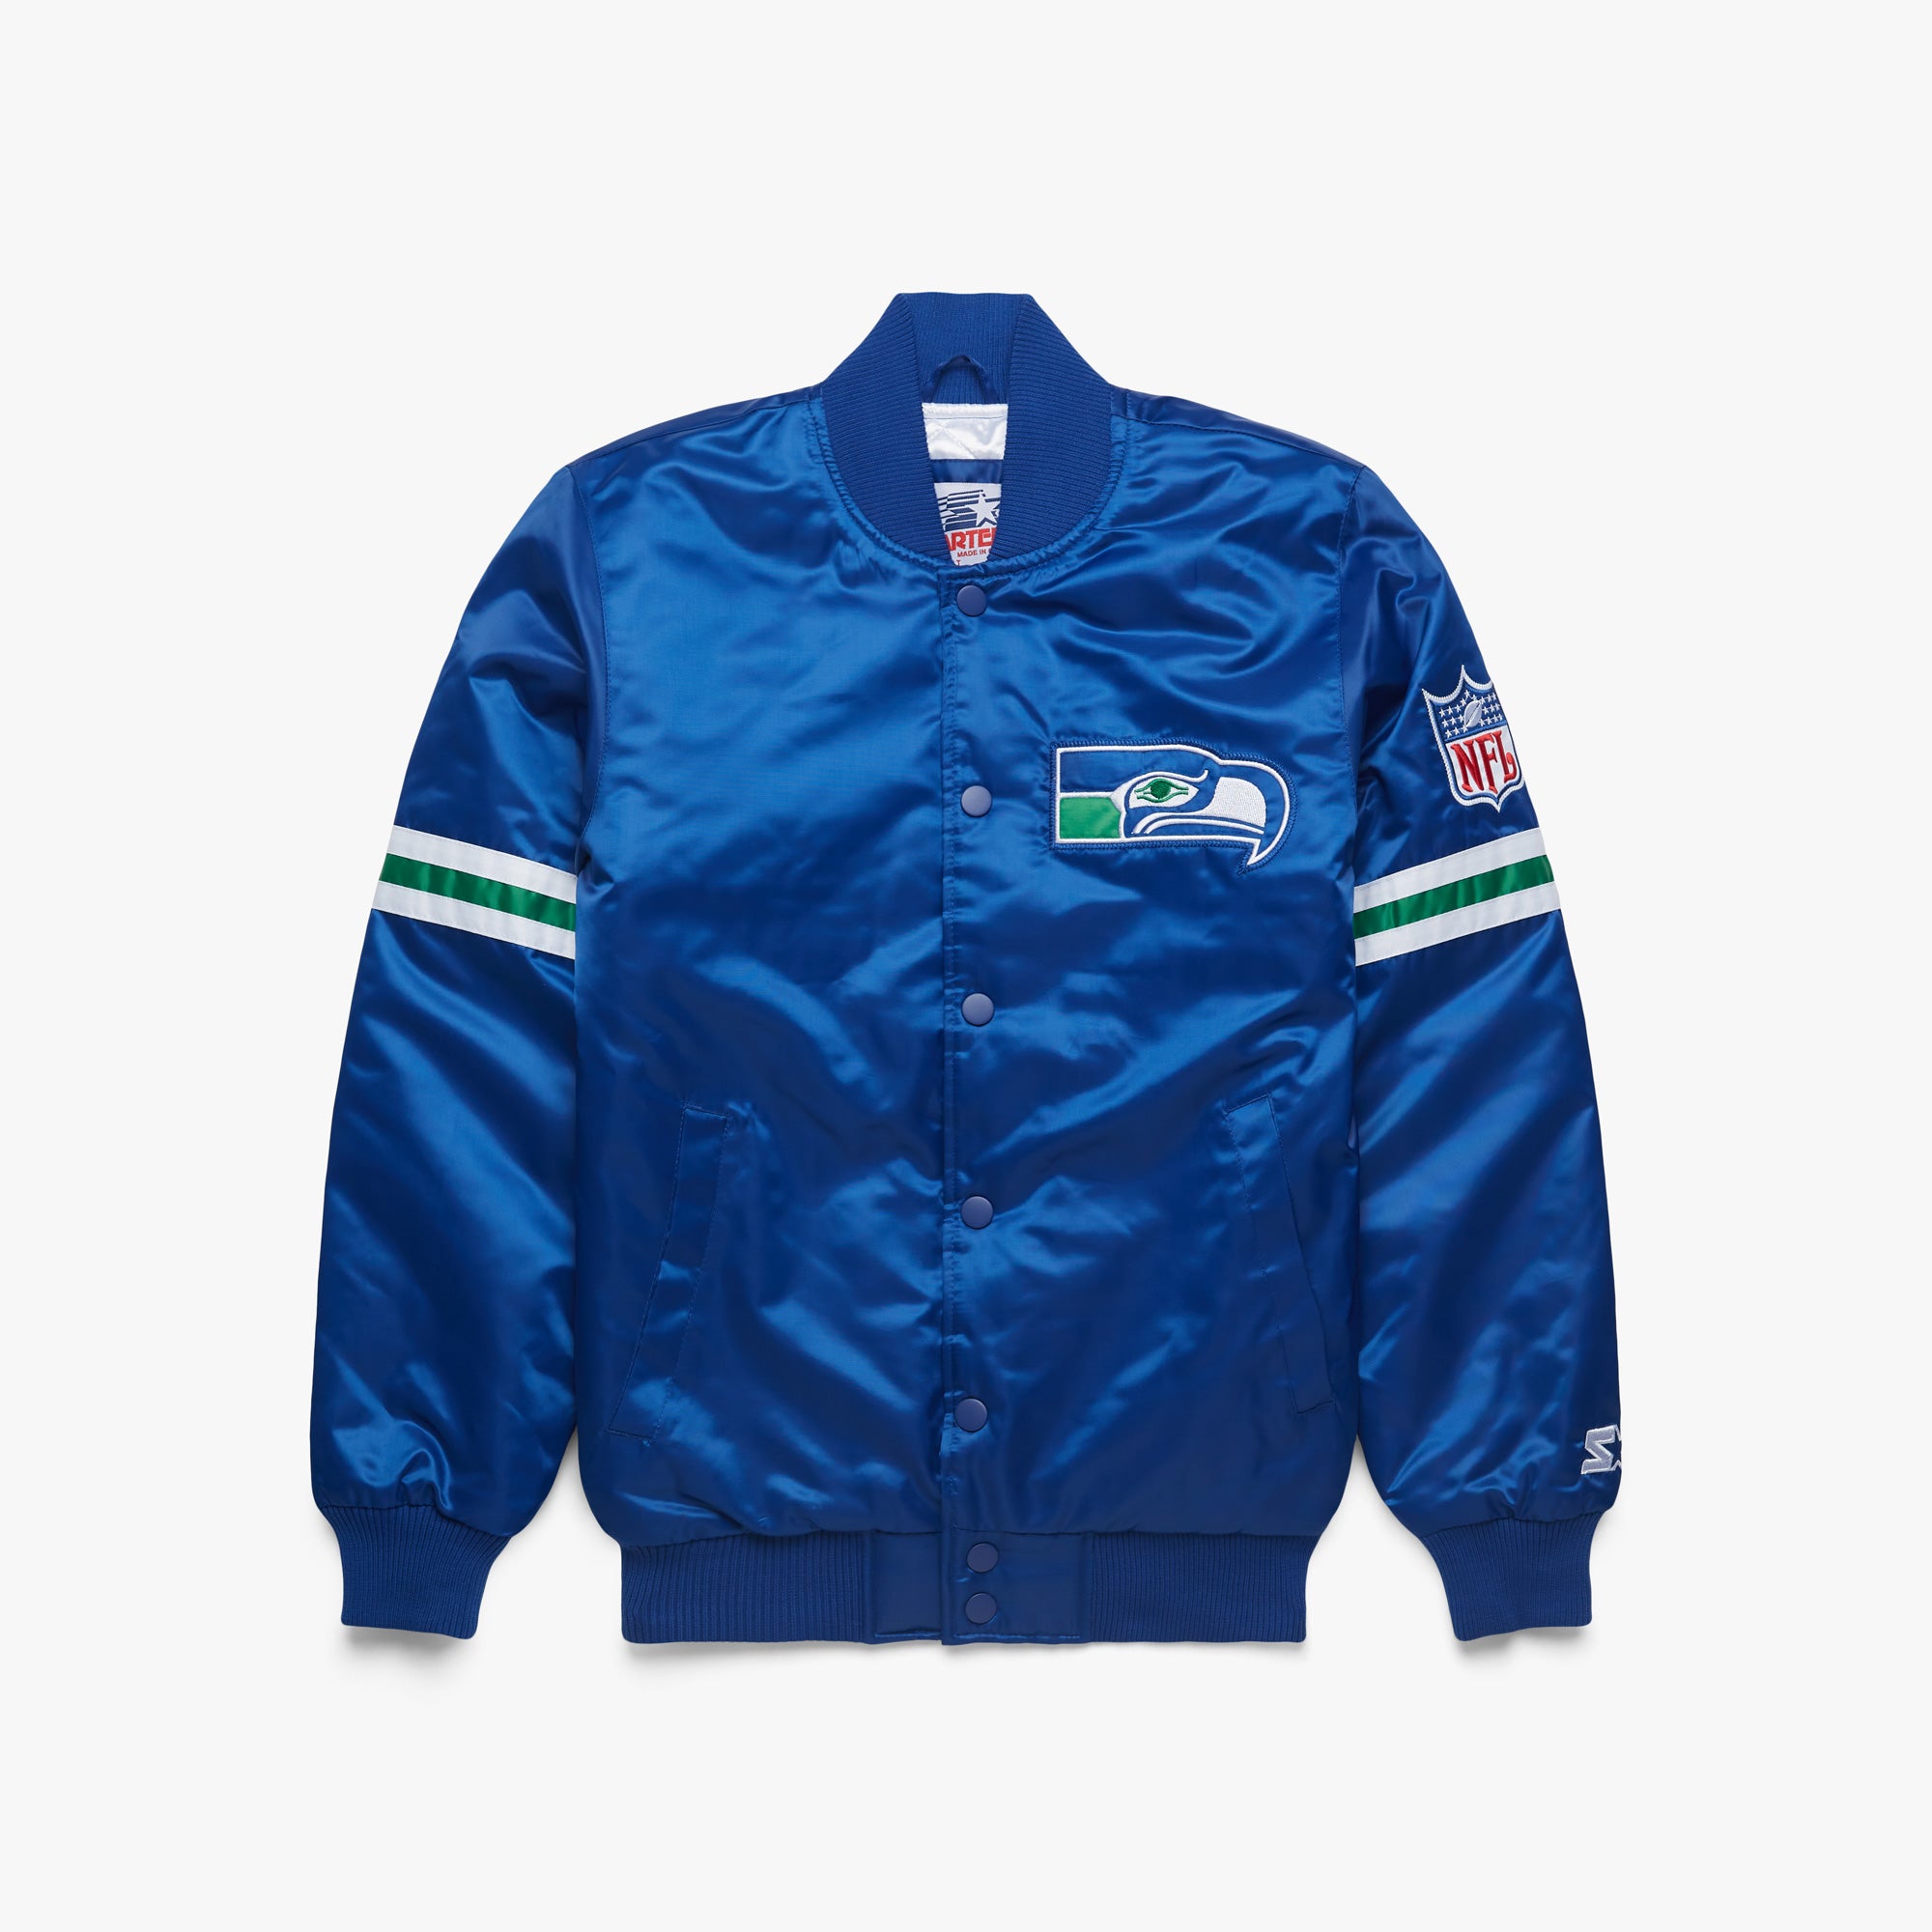 Homage x Starter Seattle Seahawks Satin Jacket from Homage. Officially Licensed NFL Apparel. Shop Pro 80's Starter, Gameday, & Bomber Jackets.